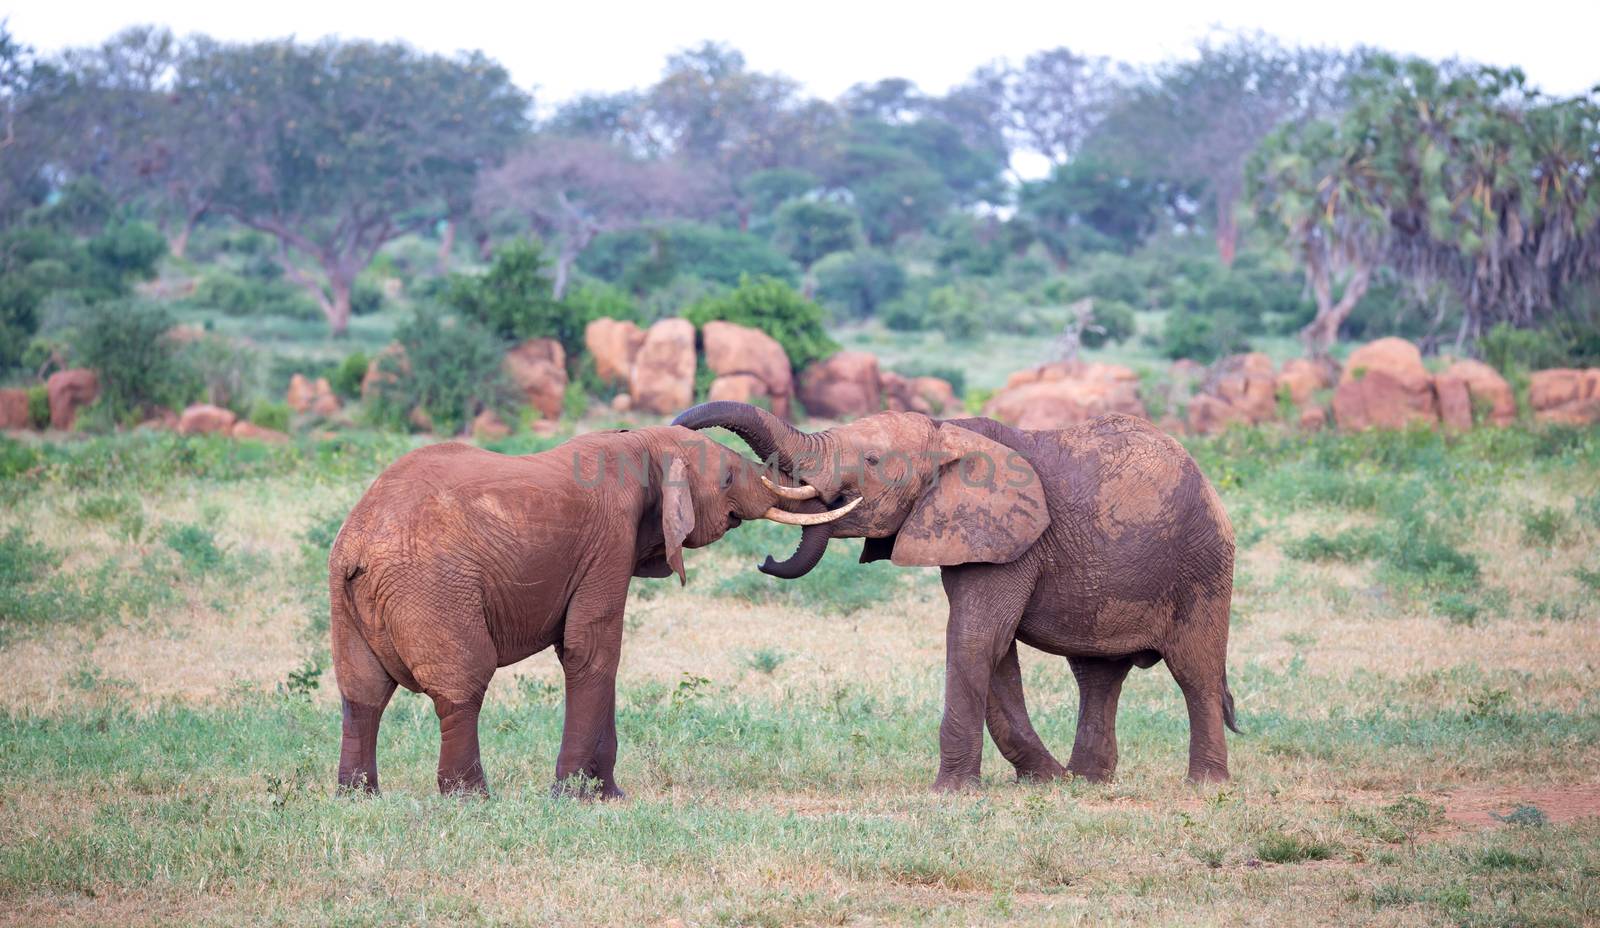 Some big red elephants try to fight each other with the trunks